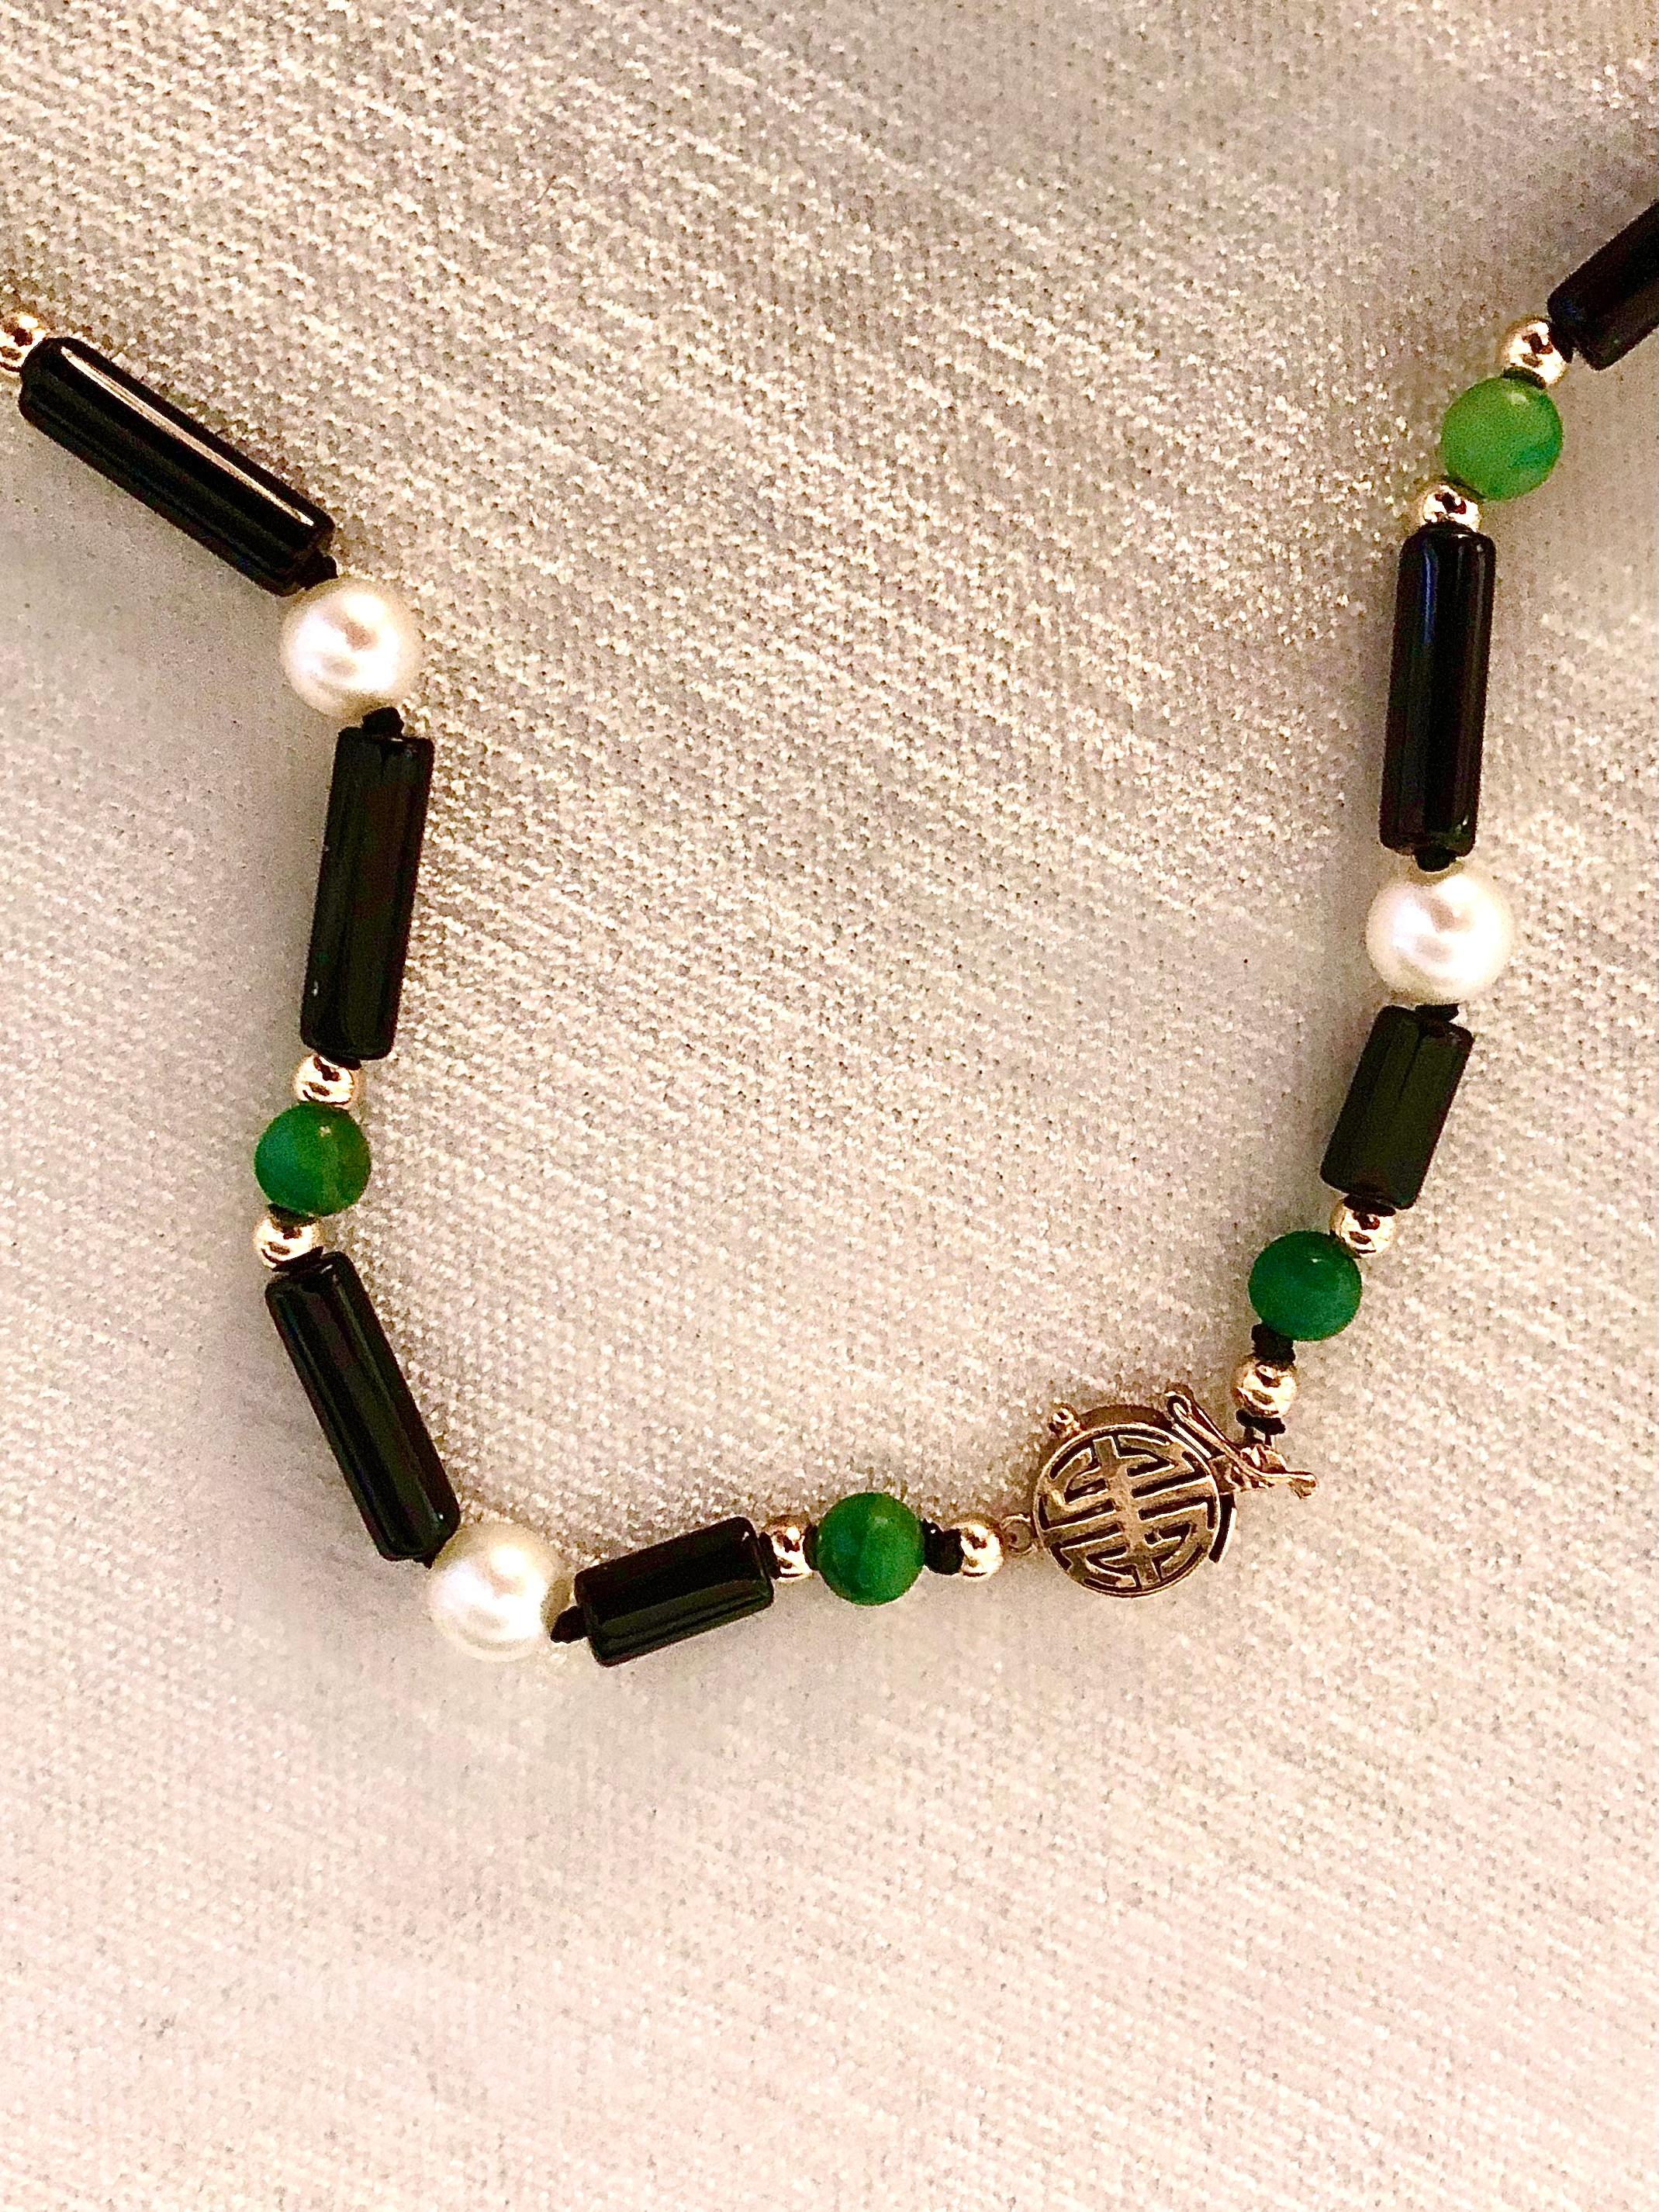 Delicate exquisitely simple convertible necklace.
Tubular onyx links are divided by alternating stations of lustrous white pearls and green jade beads flanked with smooth 14kt gold rondelles.

Suspended from an open circle of black onyx is a lovely